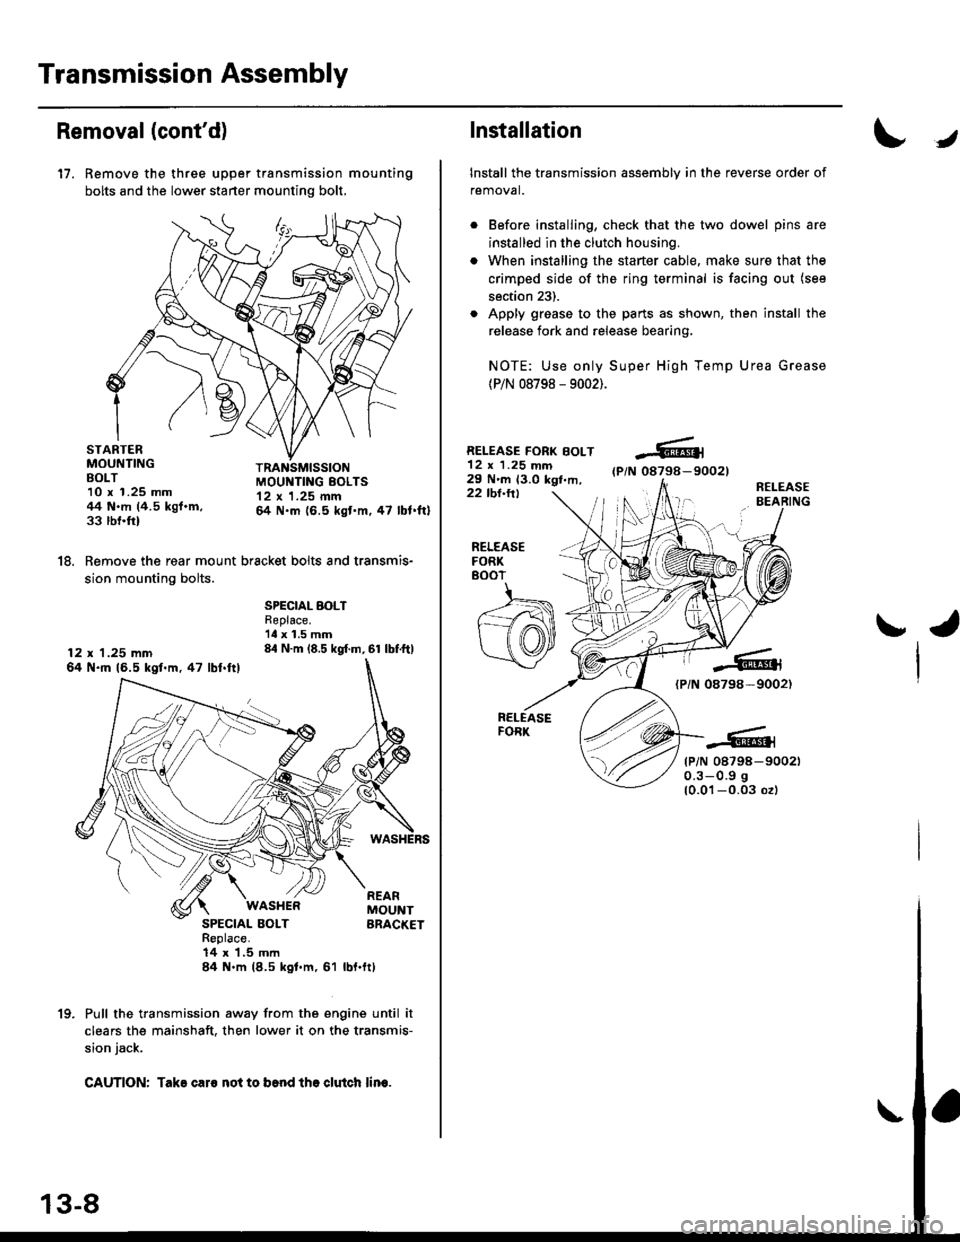 HONDA CIVIC 1999 6.G Workshop Manual Transmission Assembly
Removal(contd)
17. Remove the three upper transmission mounting
bolts and the lower starter mounting bolt,
STARTERMOUNTINGBOLT10 x 1.25 mm44 N.m (4.5 kgf.m,33 rbnftl
TRANSMISSIO